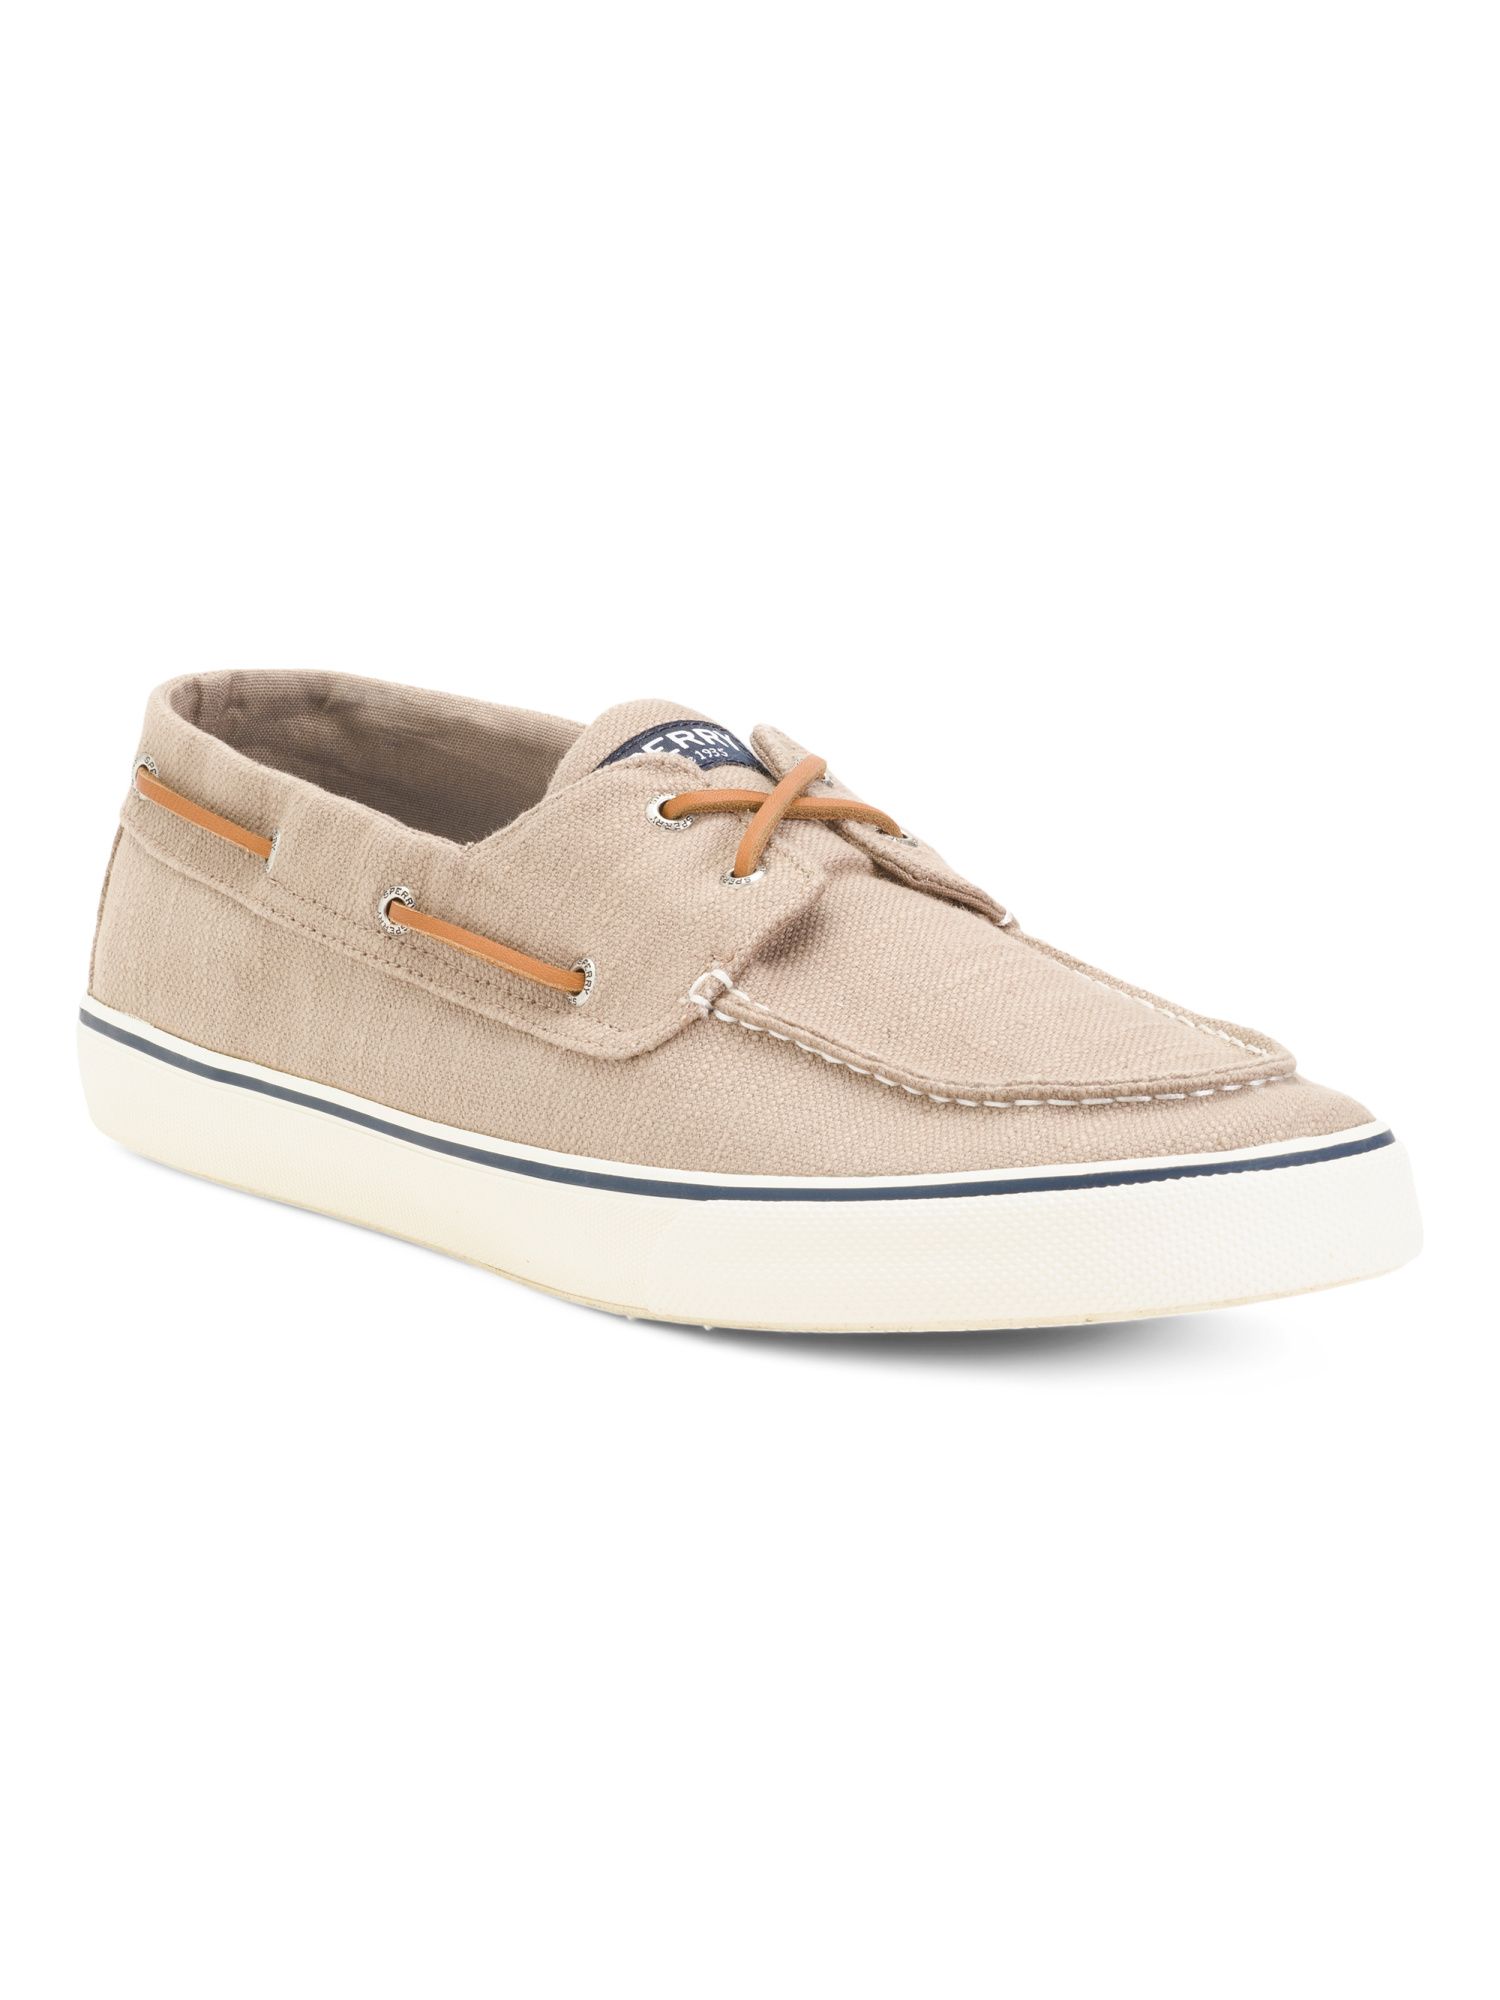 Men's Canvas Boat Shoes With Extended Sizes | Father's Day Gifts | Marshalls | Marshalls